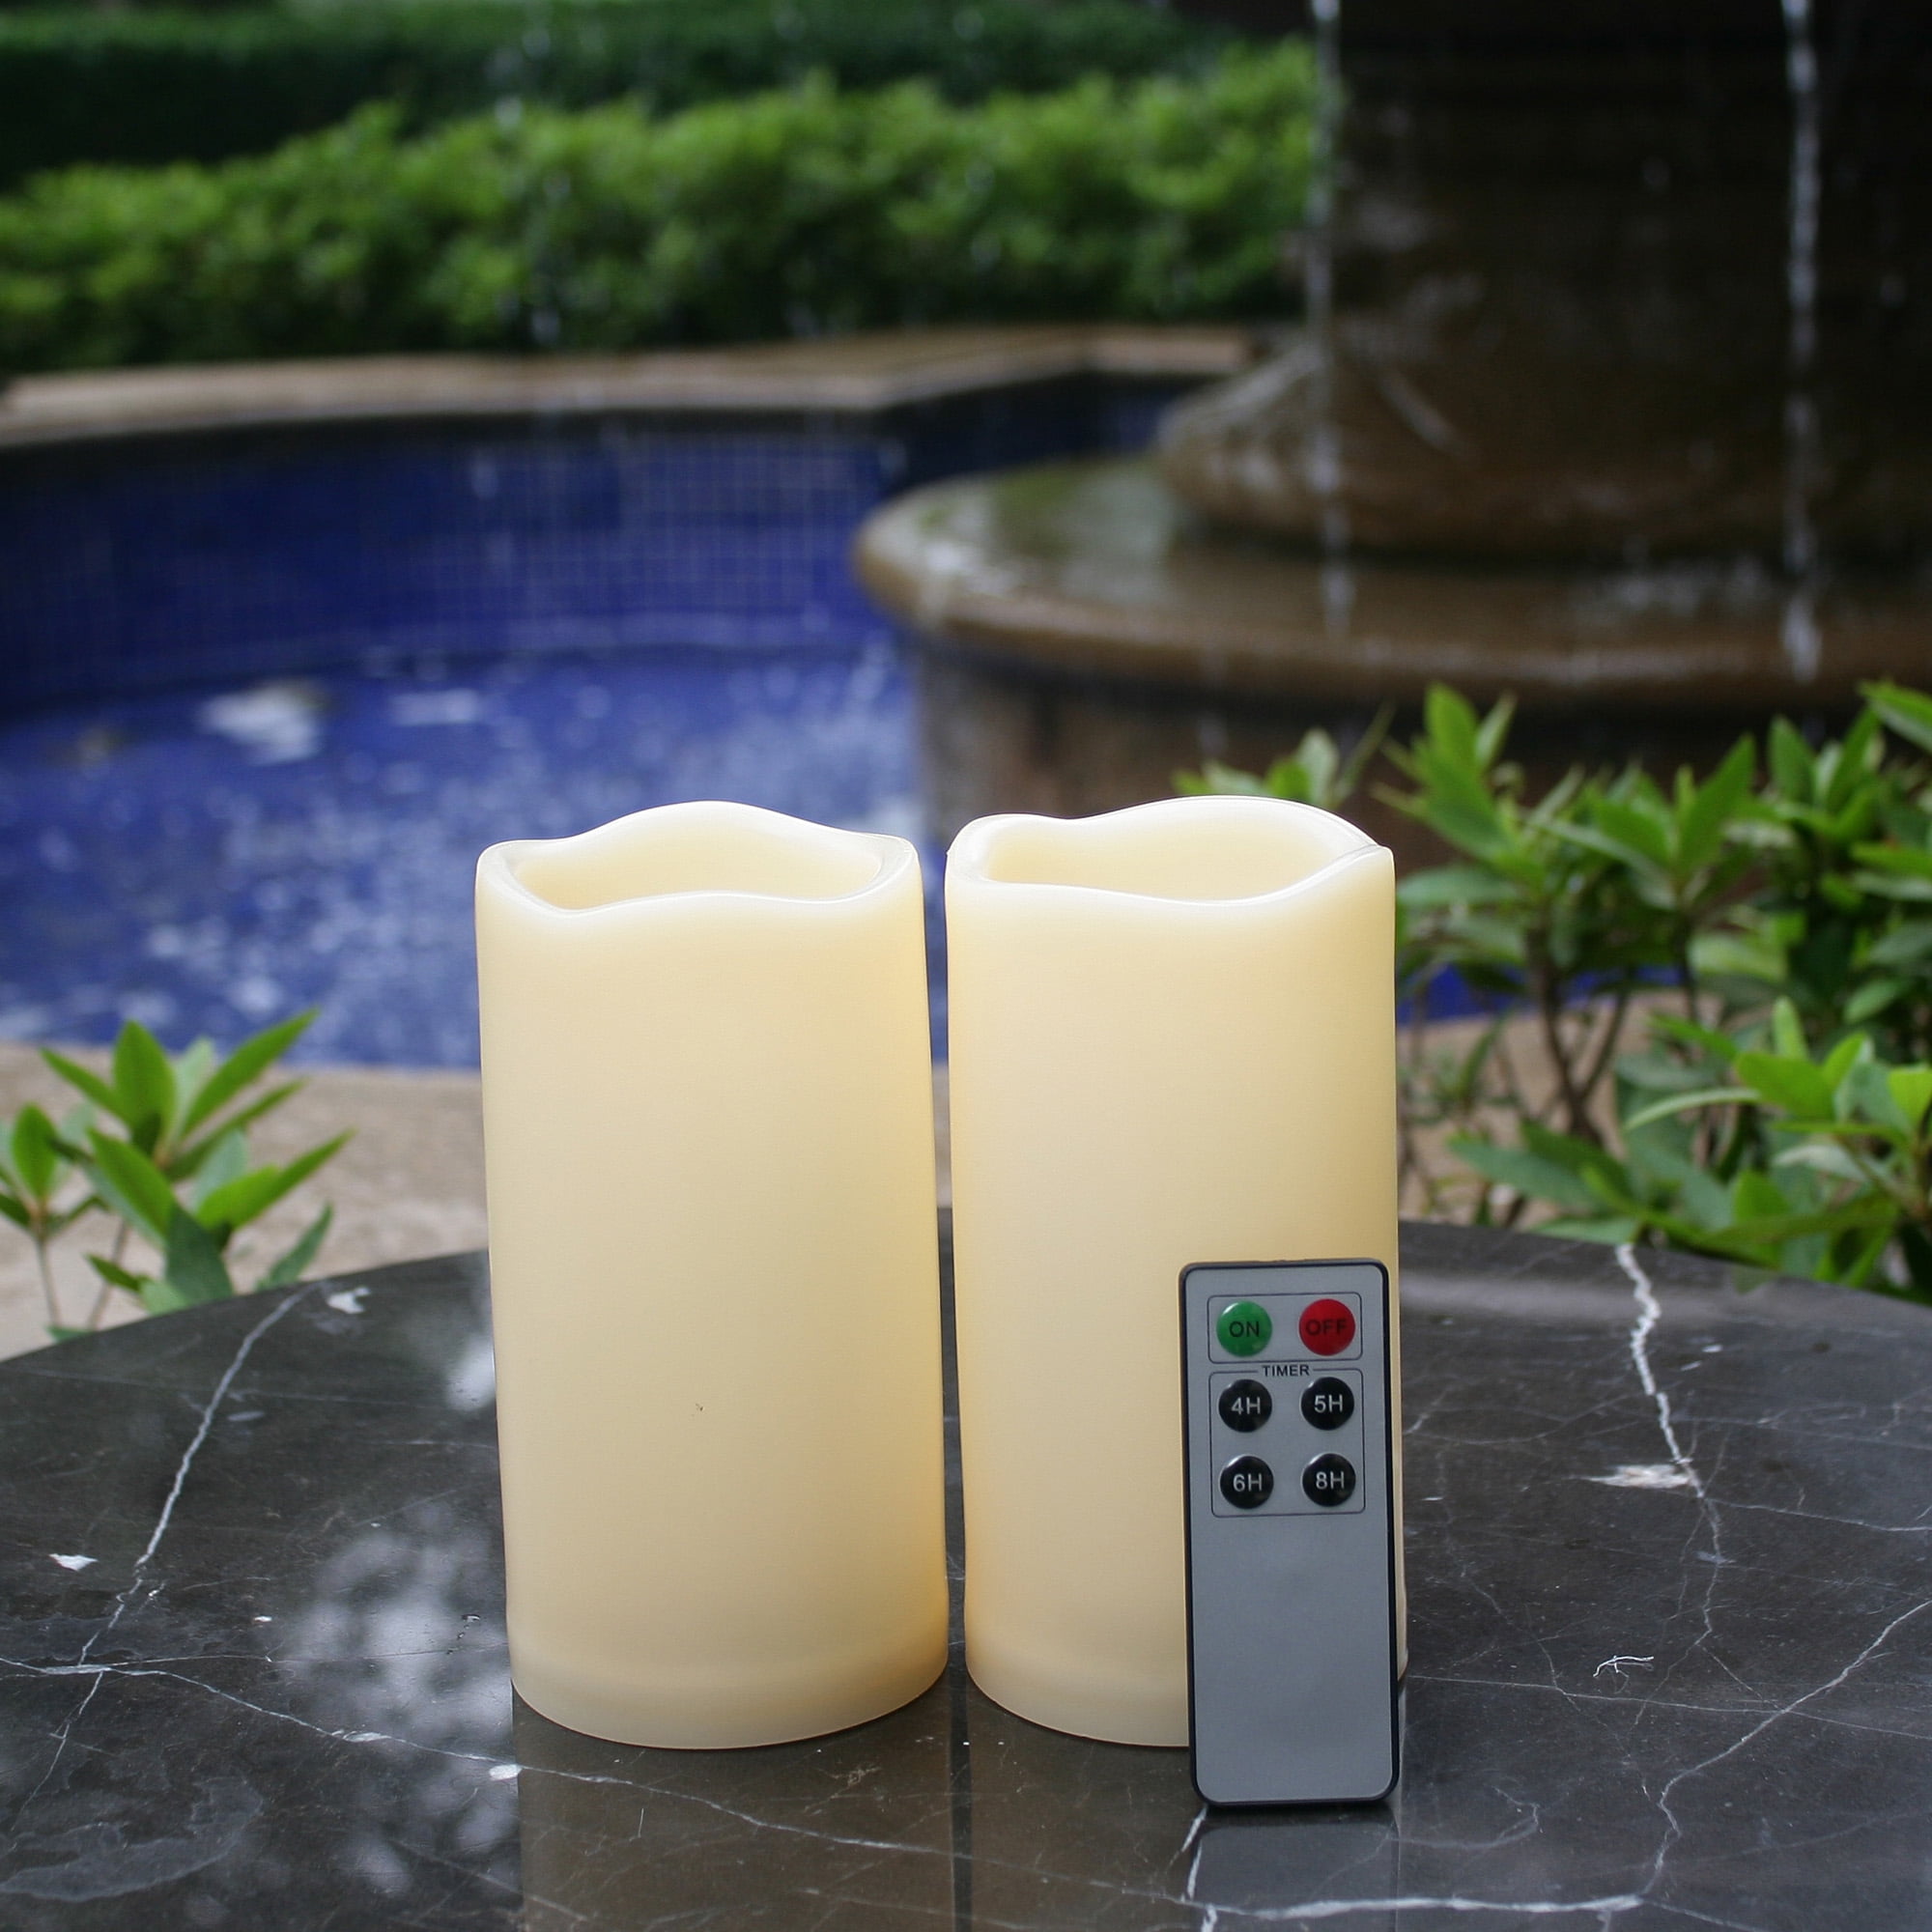 Battery Operated Flic Homemory 10” X 4" Waterproof Outdoor Flameless Candles 